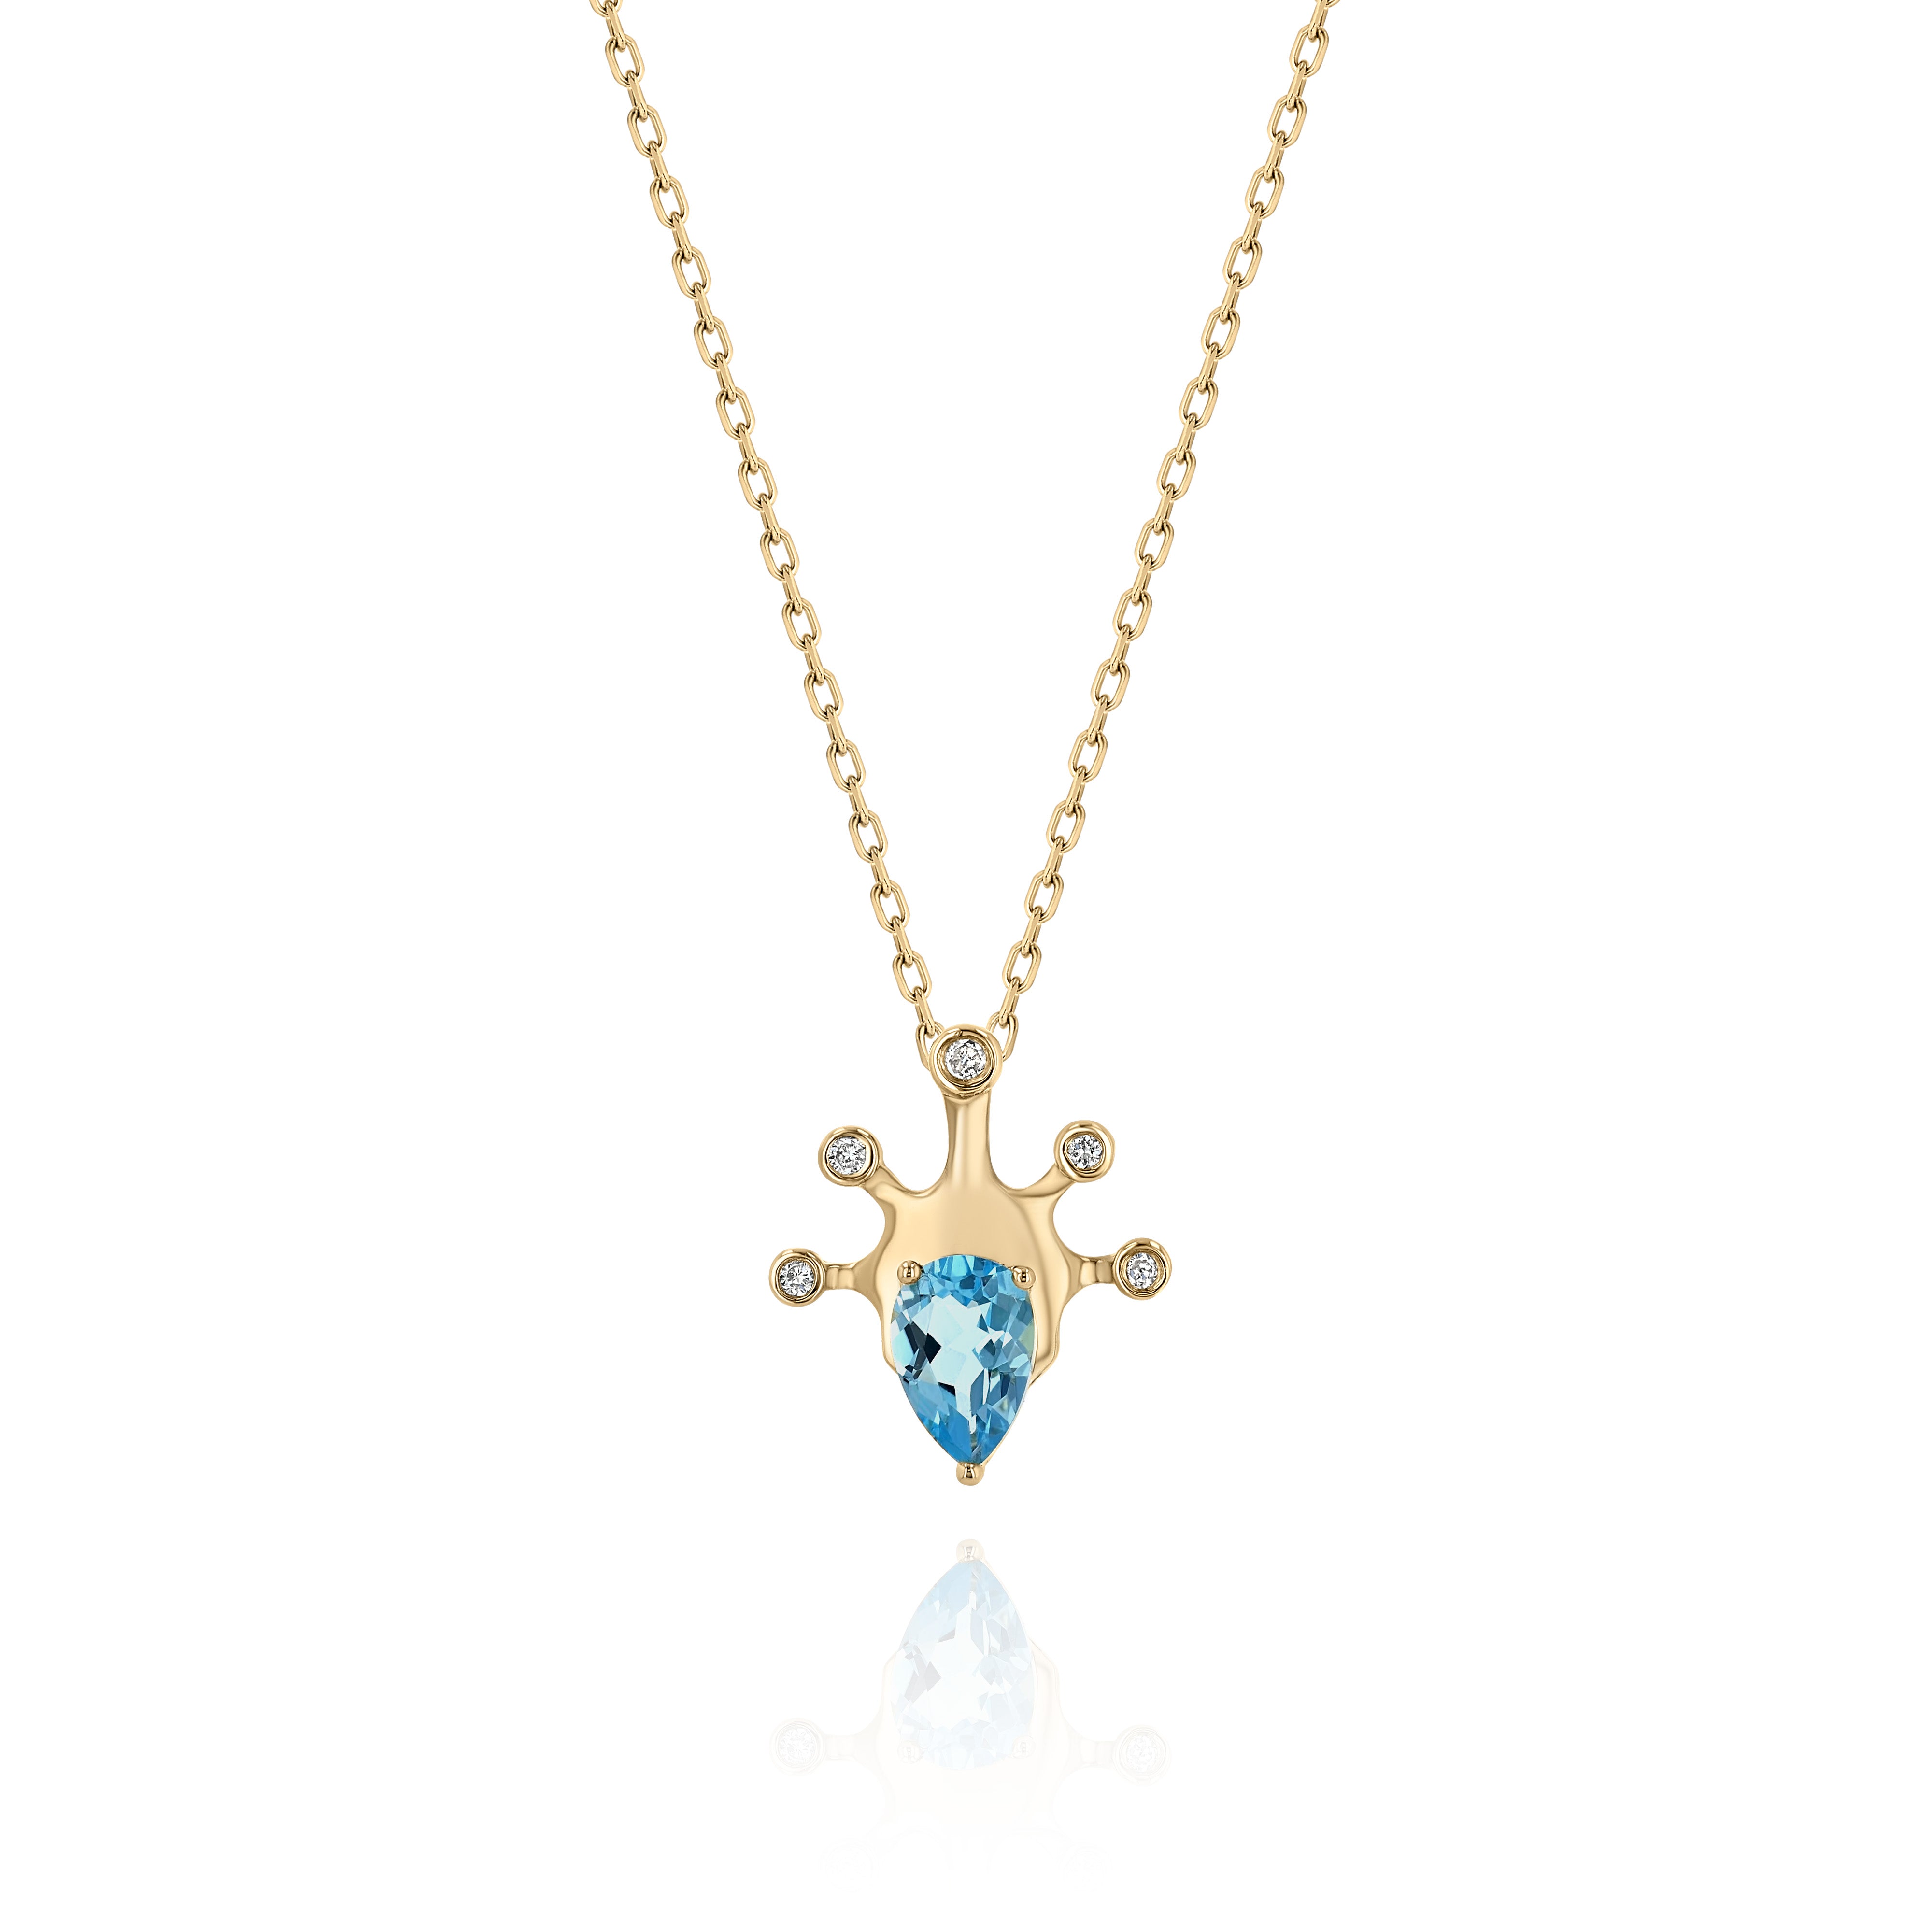 Yellow Gold Necklace with a pear shaped Topaz and small round Diamonds, Small